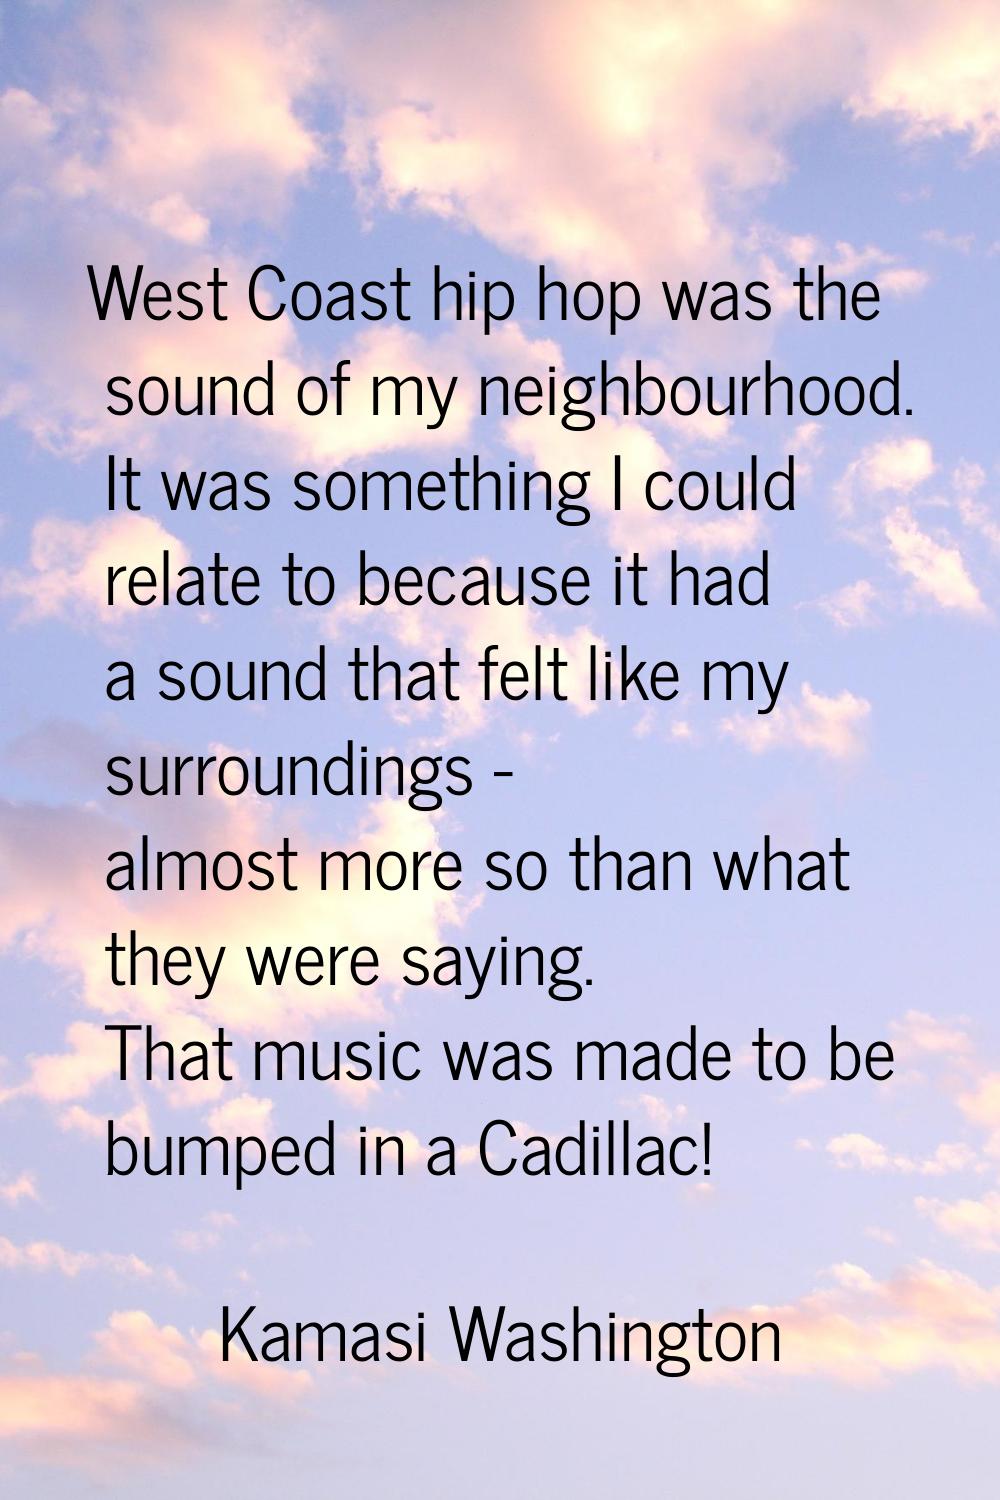 West Coast hip hop was the sound of my neighbourhood. It was something I could relate to because it